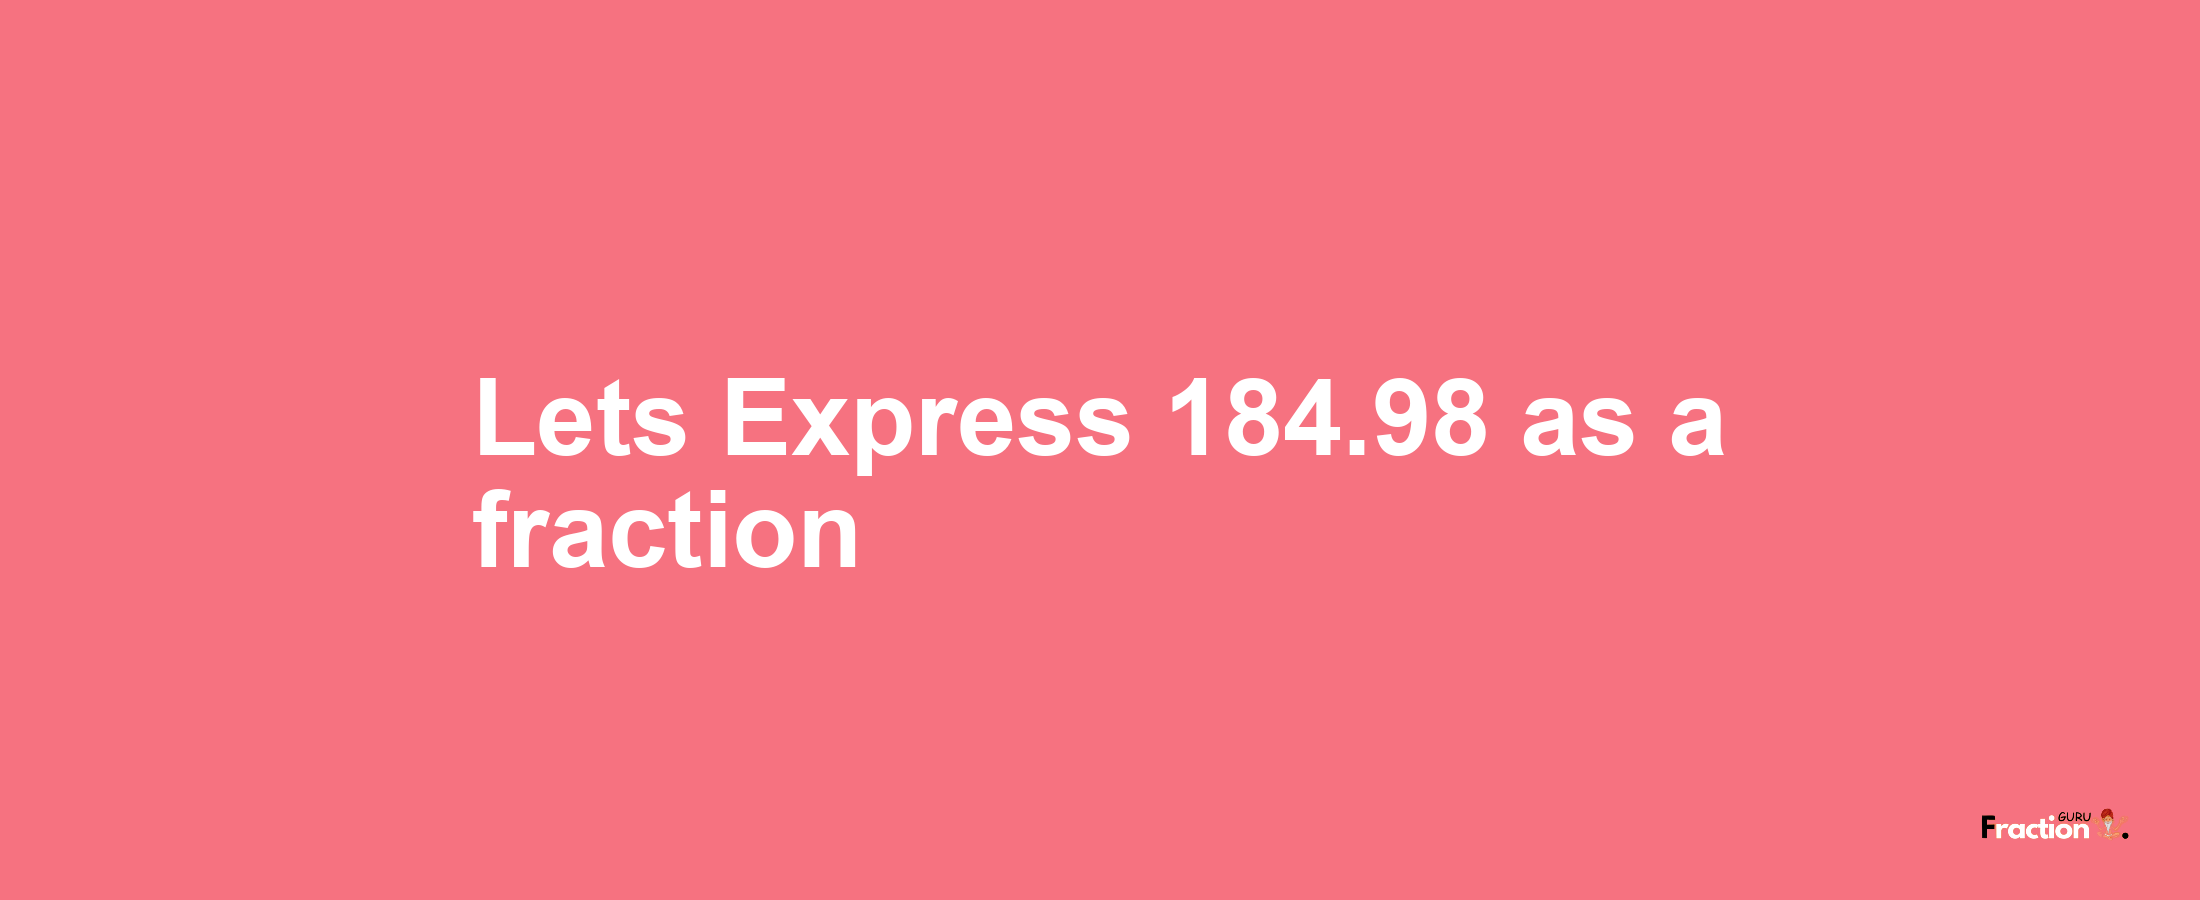 Lets Express 184.98 as afraction